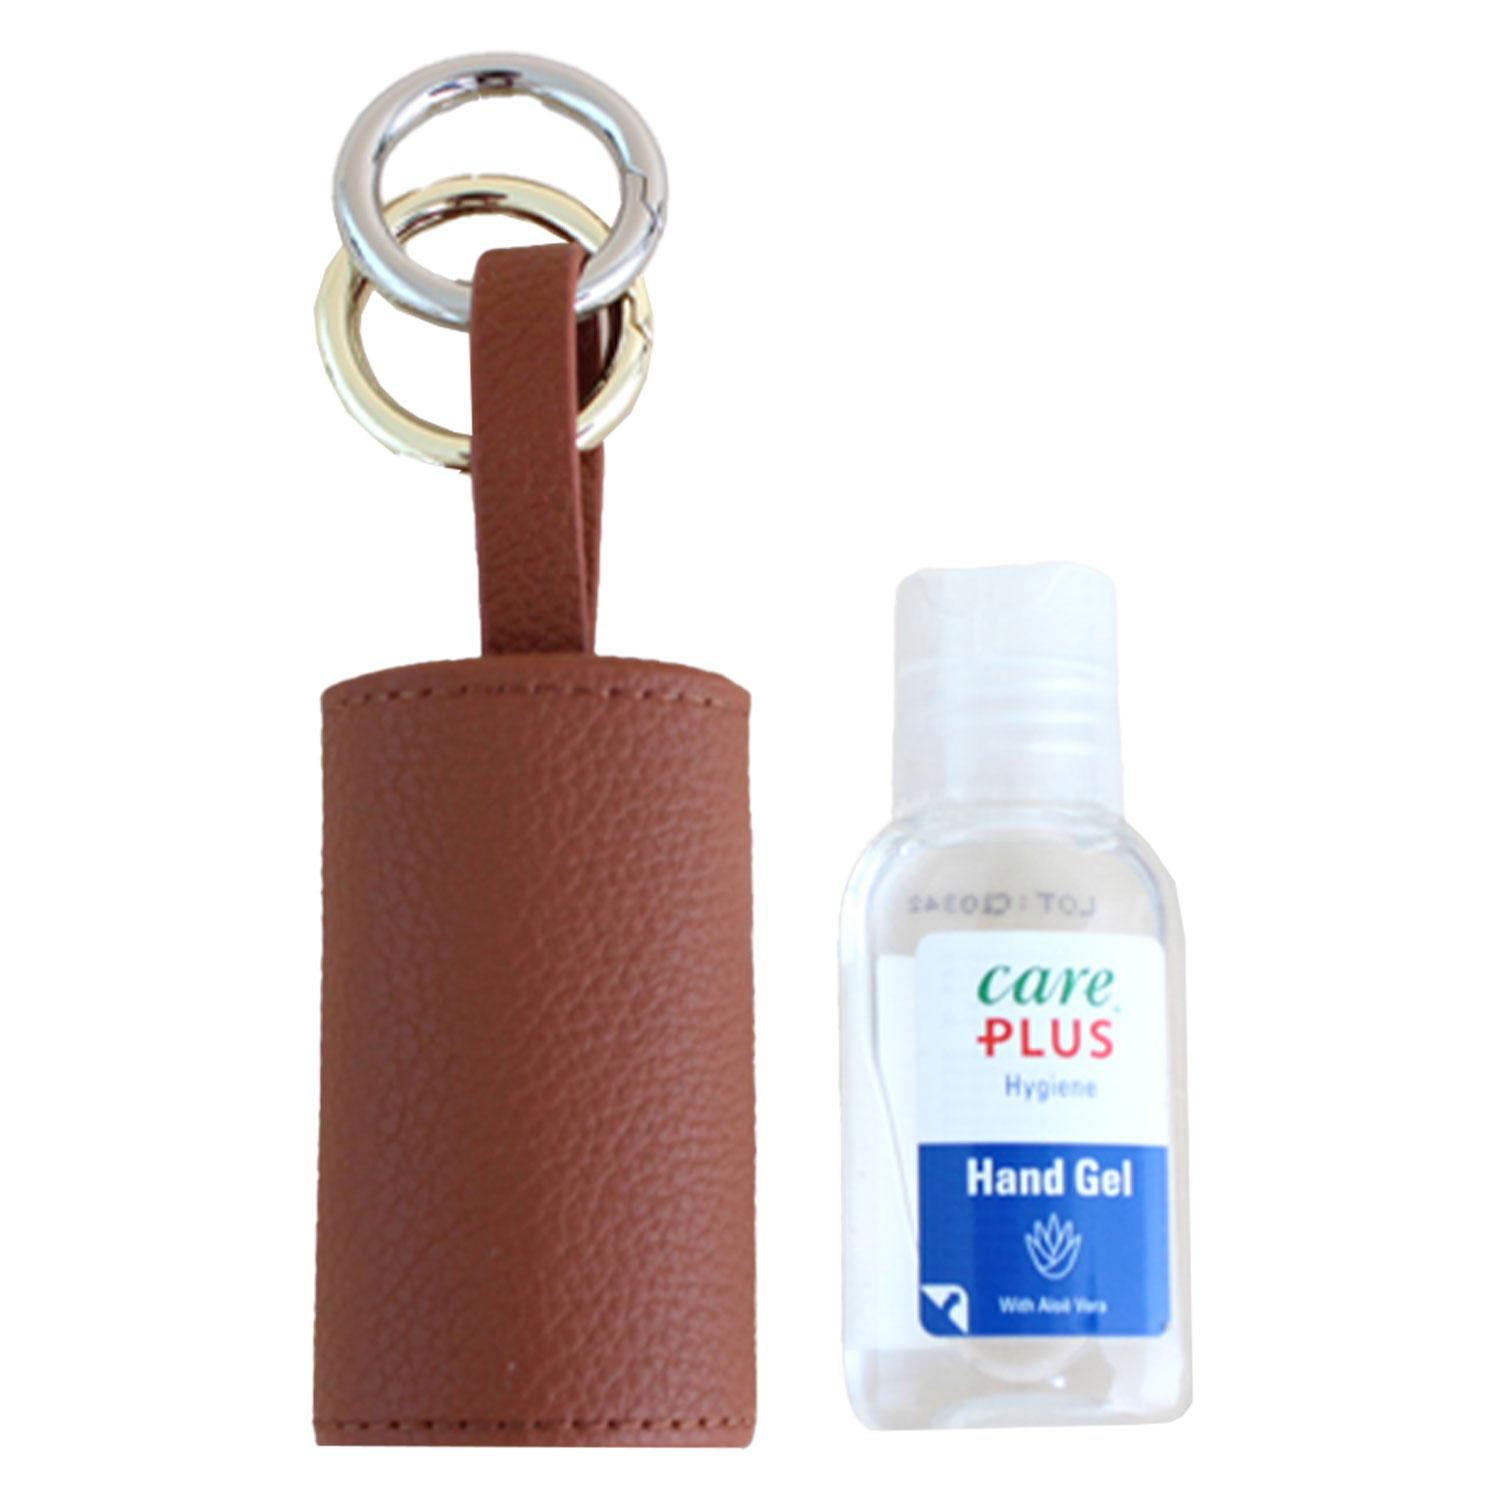 CARRY & CO. - Handcare Leather Case with Gold and Silver Key Ring Brown